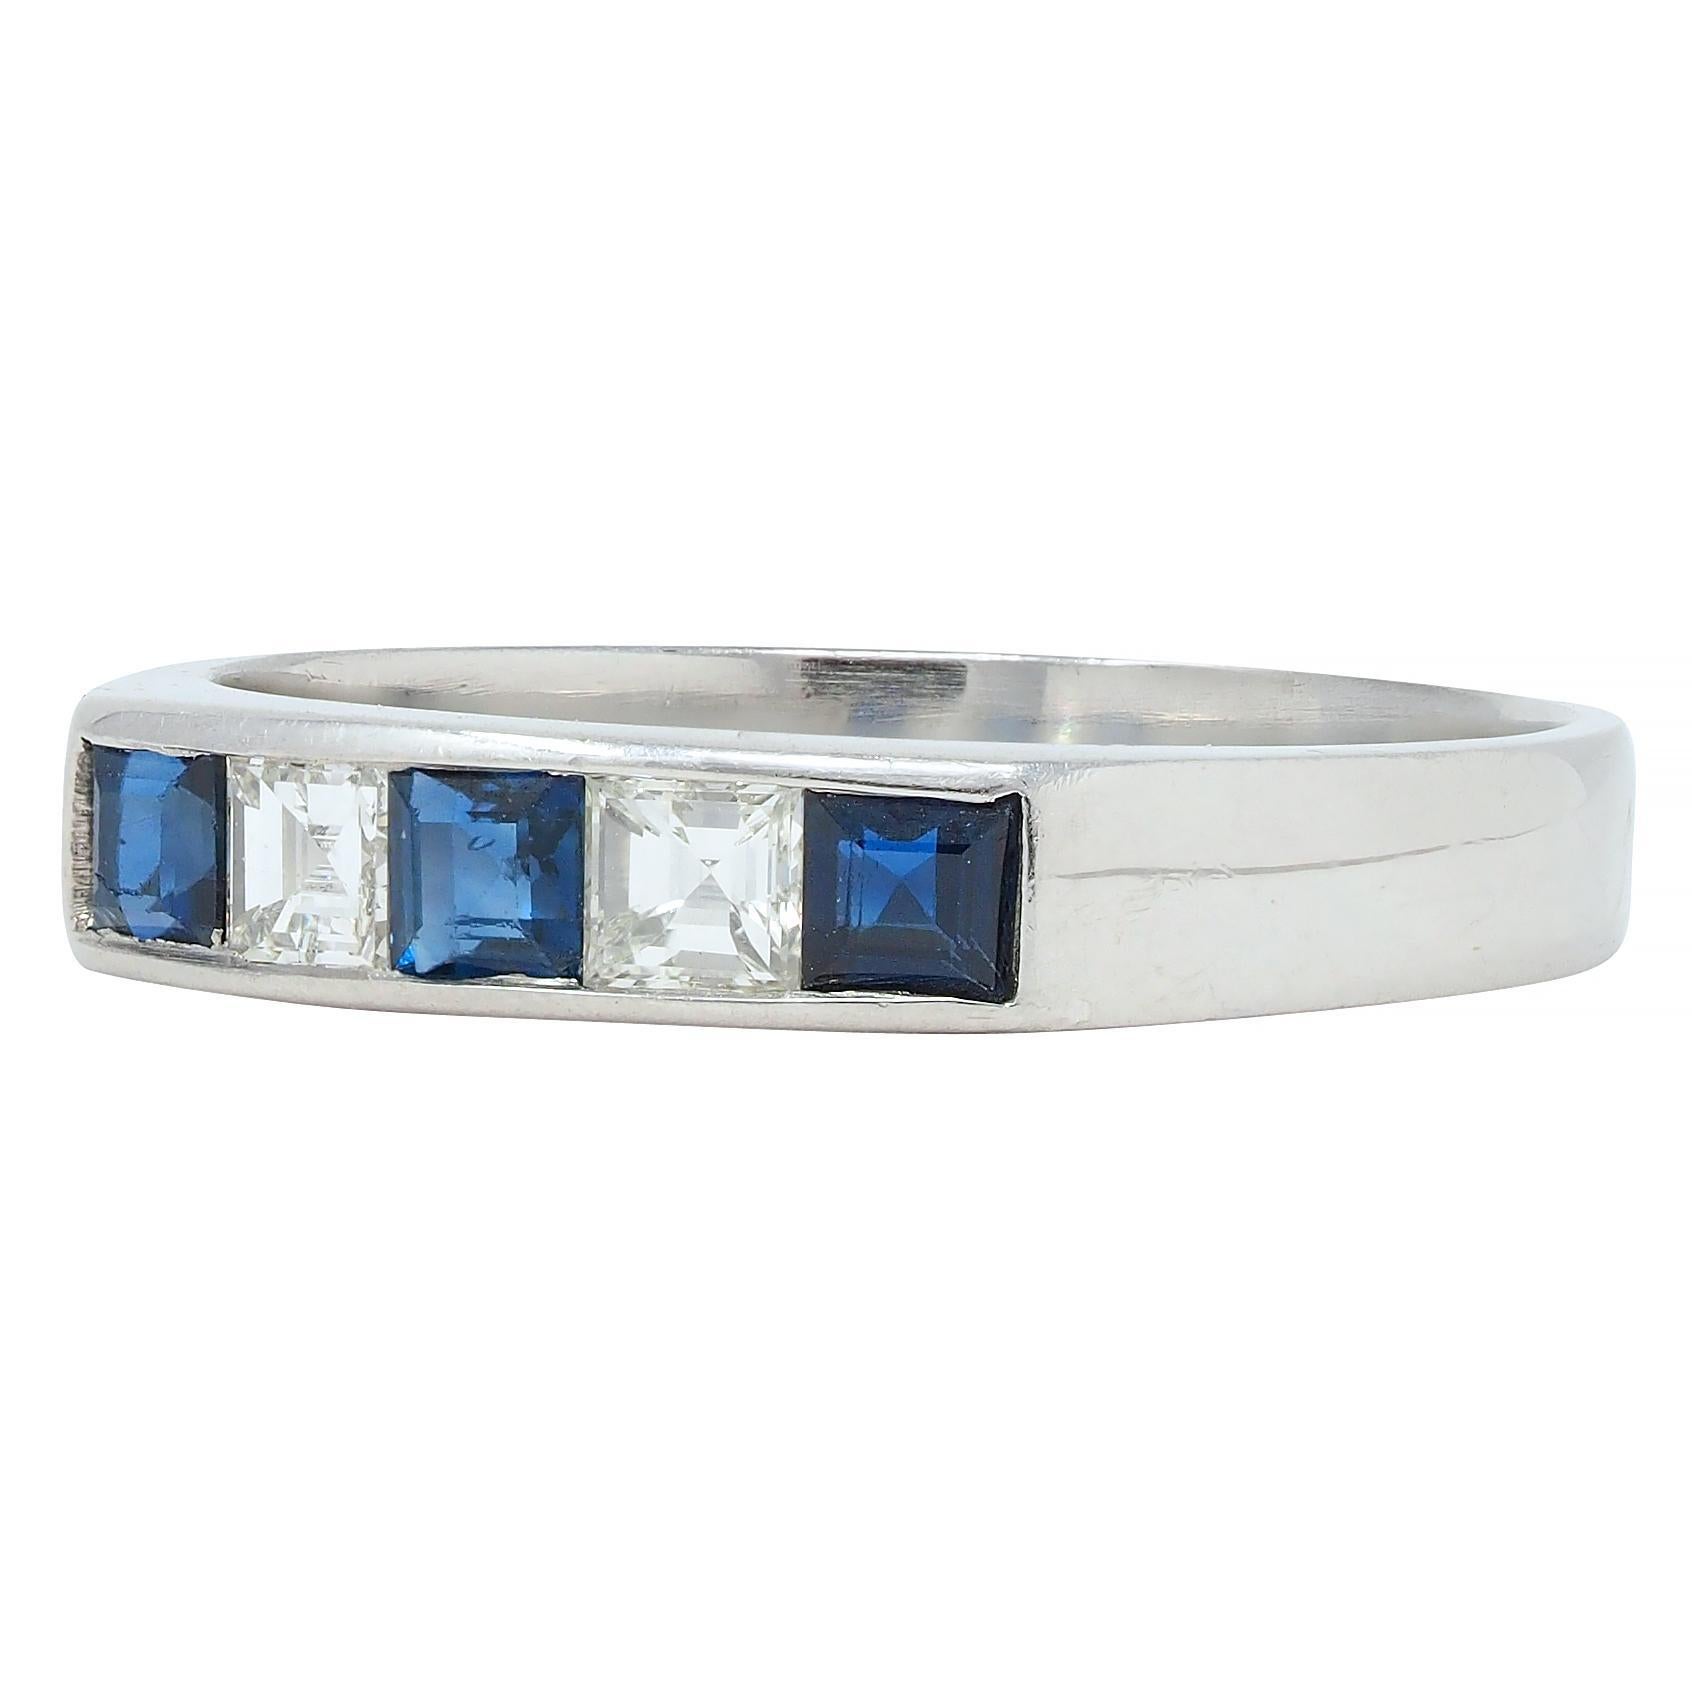 Featuring square step cut sapphires and diamonds alternating in pattern
Sapphires weigh 0.40 carat total - transparent dark blue in color
Diamonds weigh 0.23 carat total - G color with VS2 clarity
Channel set to front with sloped shoulders
With high